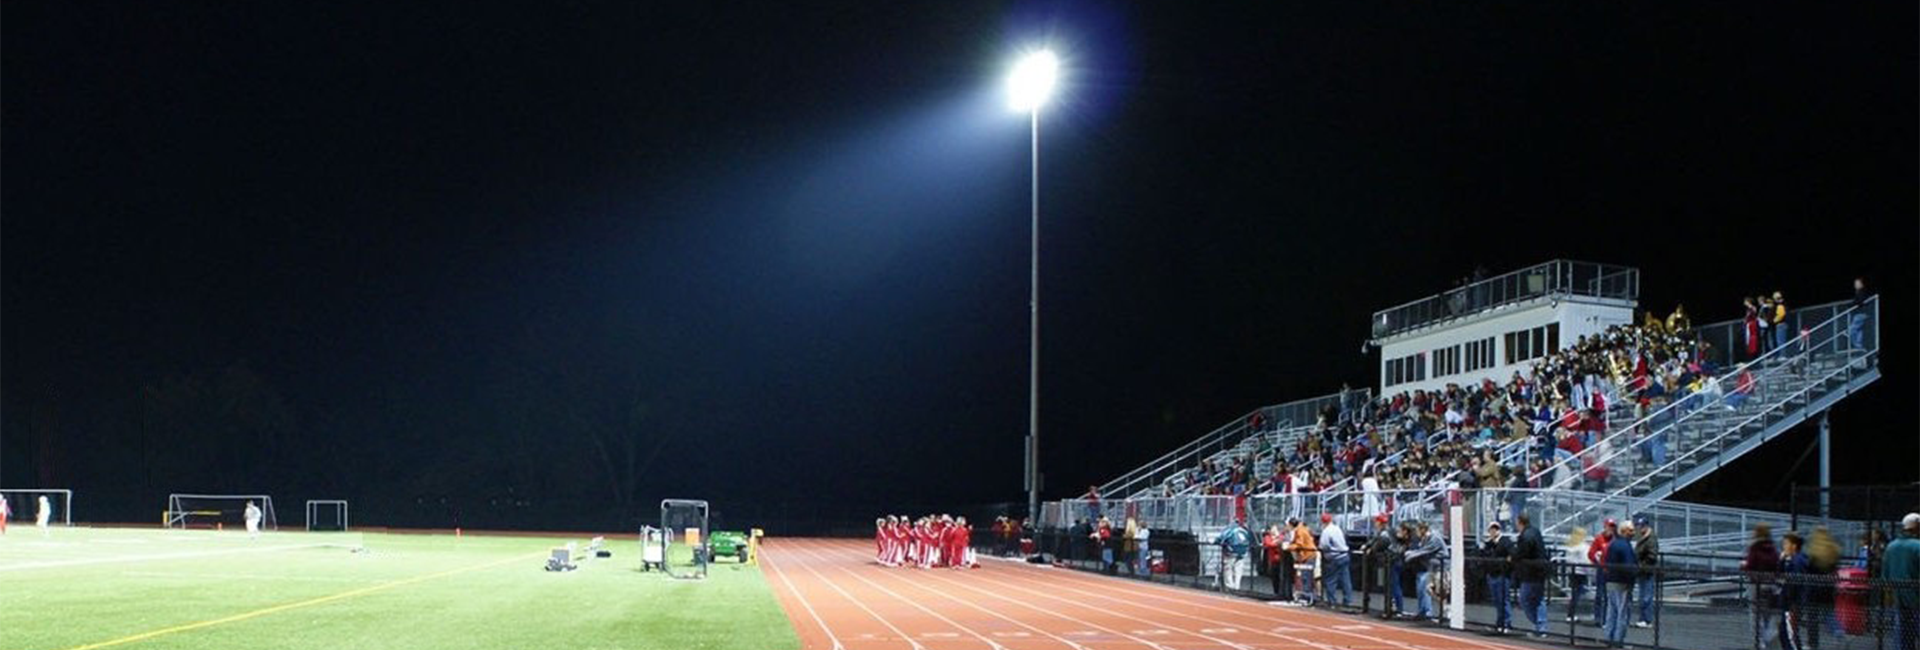 Benefits of Using LED Lights in stadiums or sports centres | Vizona